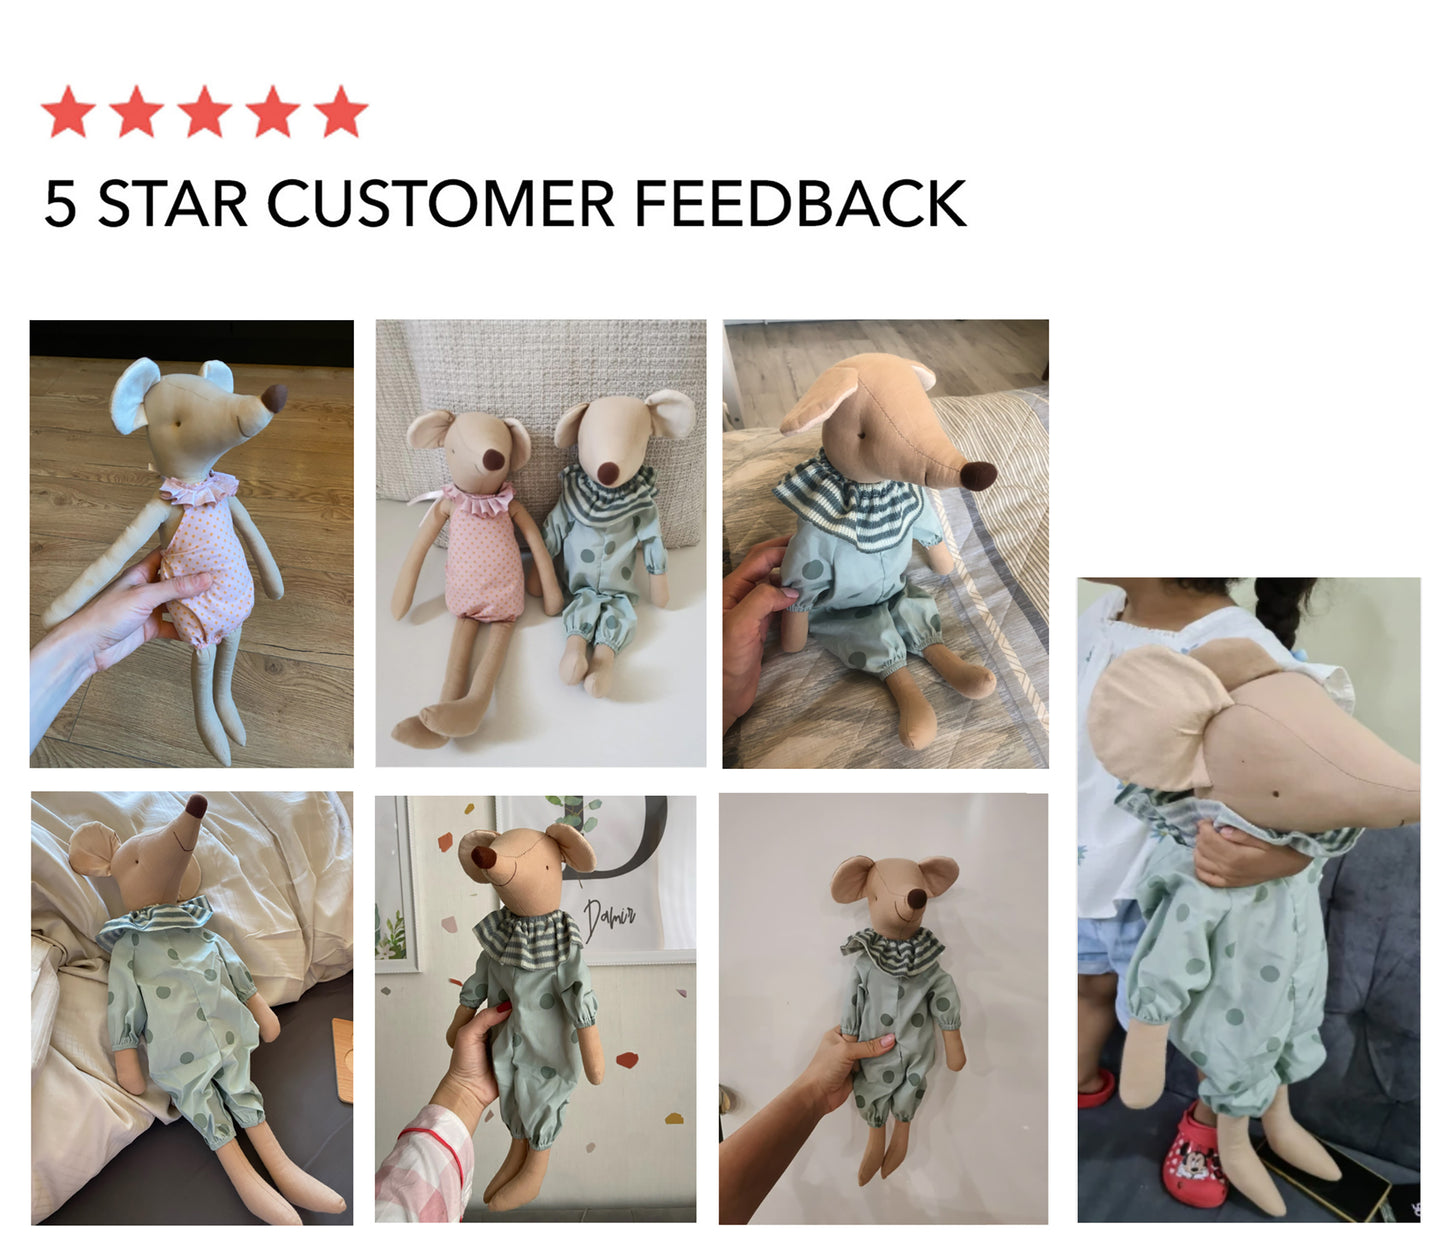 Mr & Mrs Mouse Soft Touch Dolls